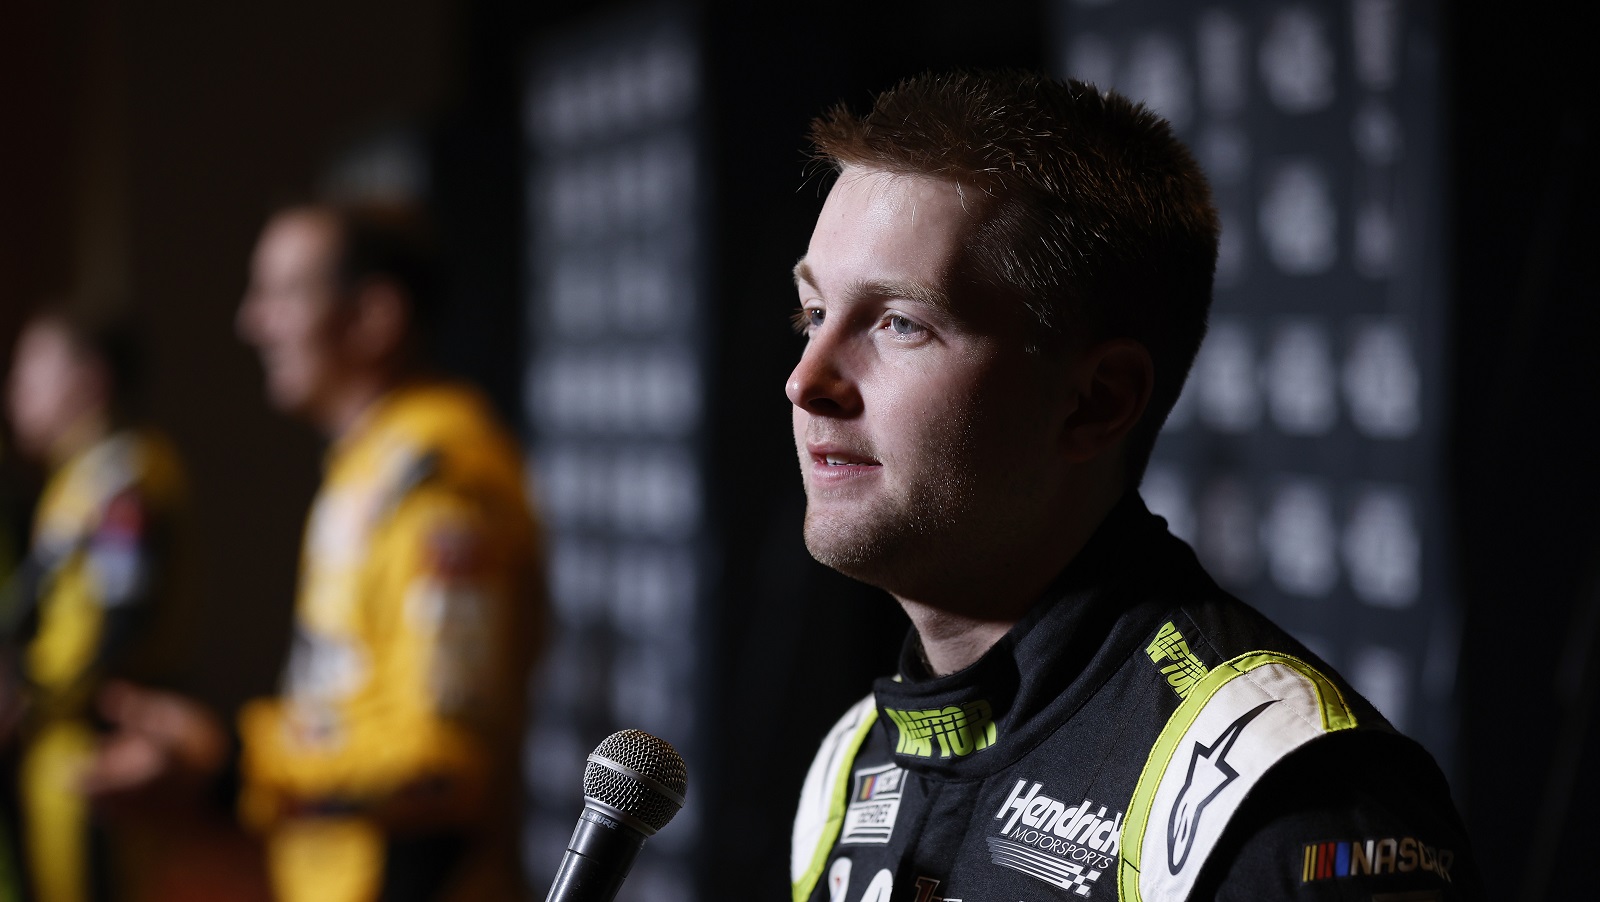 NASCAR driver William Byron speaks with reporters during the NASCAR Cup Series Playoff Media Day at Charlotte Convention Center on Sept. 1, 2022. | Jared C. Tilton/Getty Images